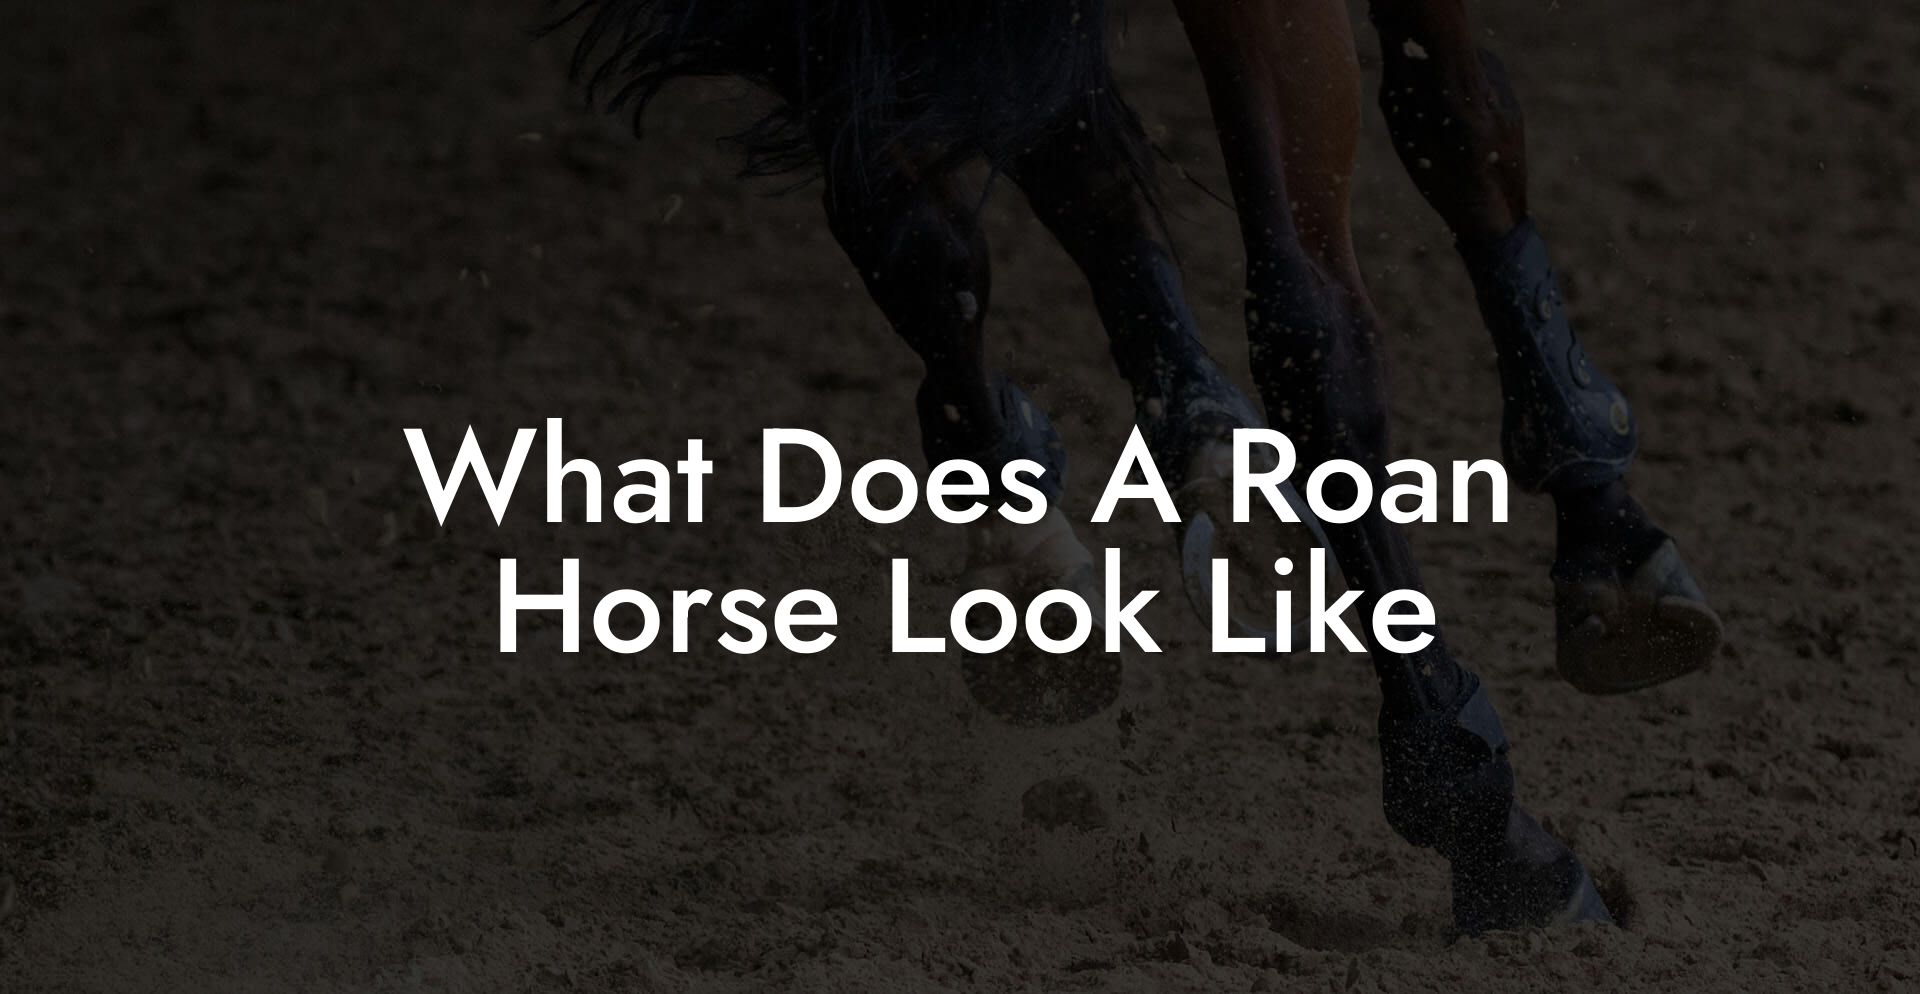 What Does A Roan Horse Look Like